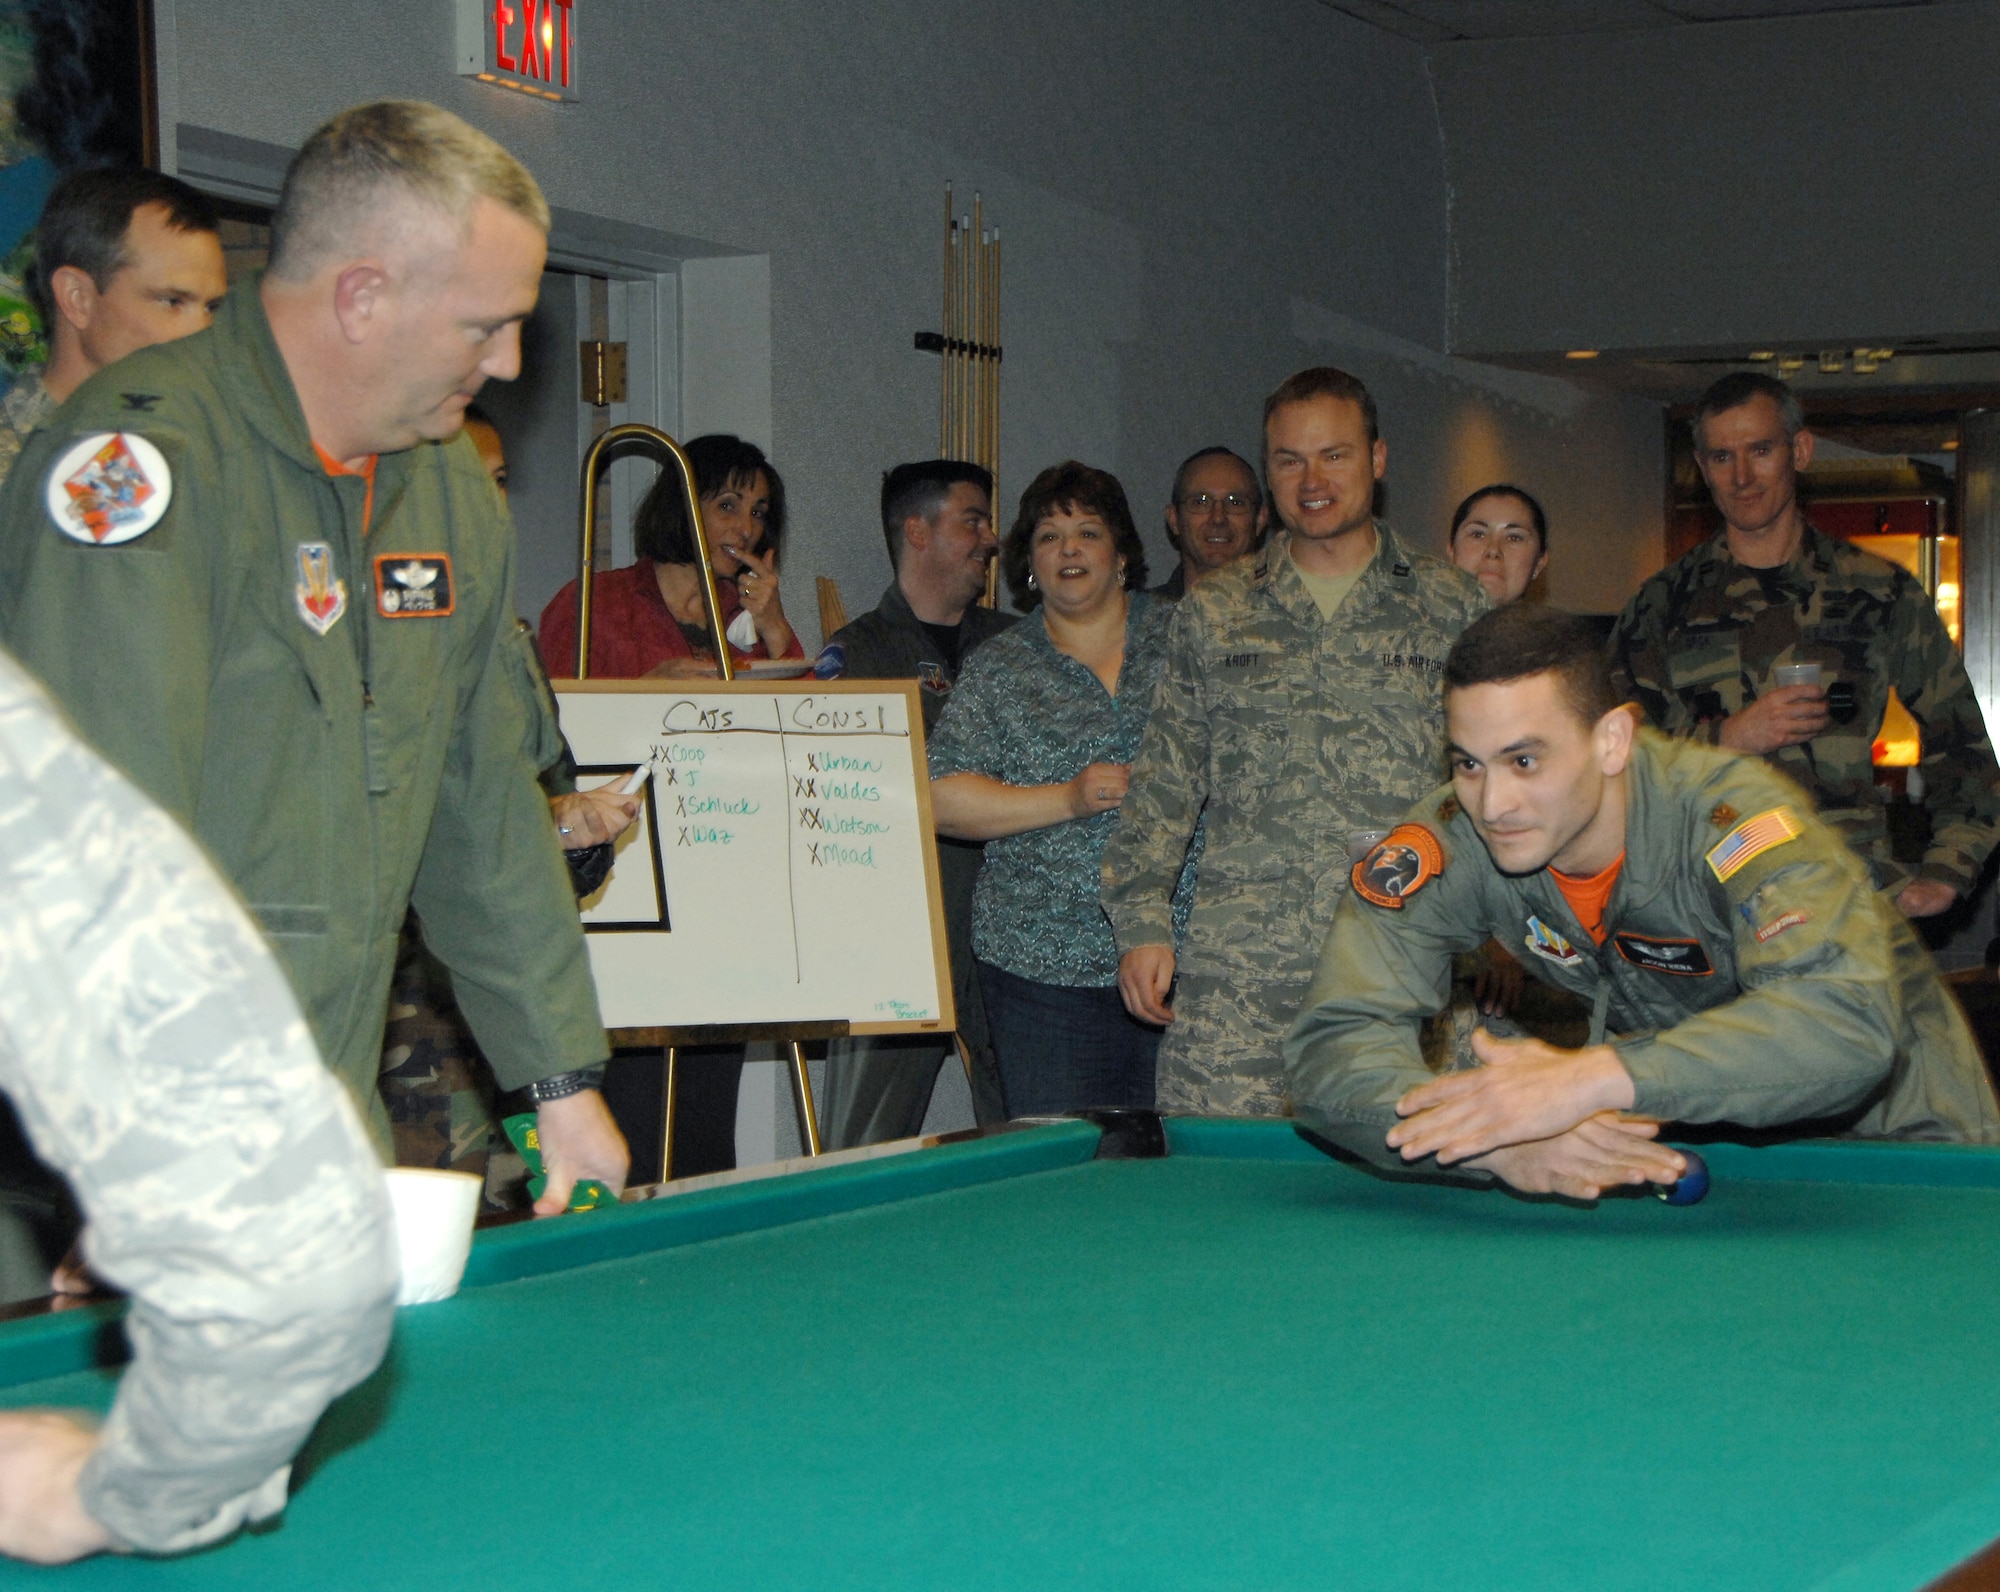 OFFUTT AIR FORCE BASE, Neb. -- Maj. Jason Riera, Assistant Director of Operations, 55th Combat Training Squadron, plays a game of "Crud" during a tournament at the Patriot Club Feb.  6. The tournament winners were Col. Thomas Goffus, 55th Mission Support Group commander, Lt. Col. Mitchell Maddox, 55th Mission Support Group deputy commander, Lt. Col. John Jacobson, 55th Contracting Squadron commander and Capt. Stephen Kroft, 55th Mission Support Group executive officer.  

U.S. Air Force Photo by Dana P. Heard
